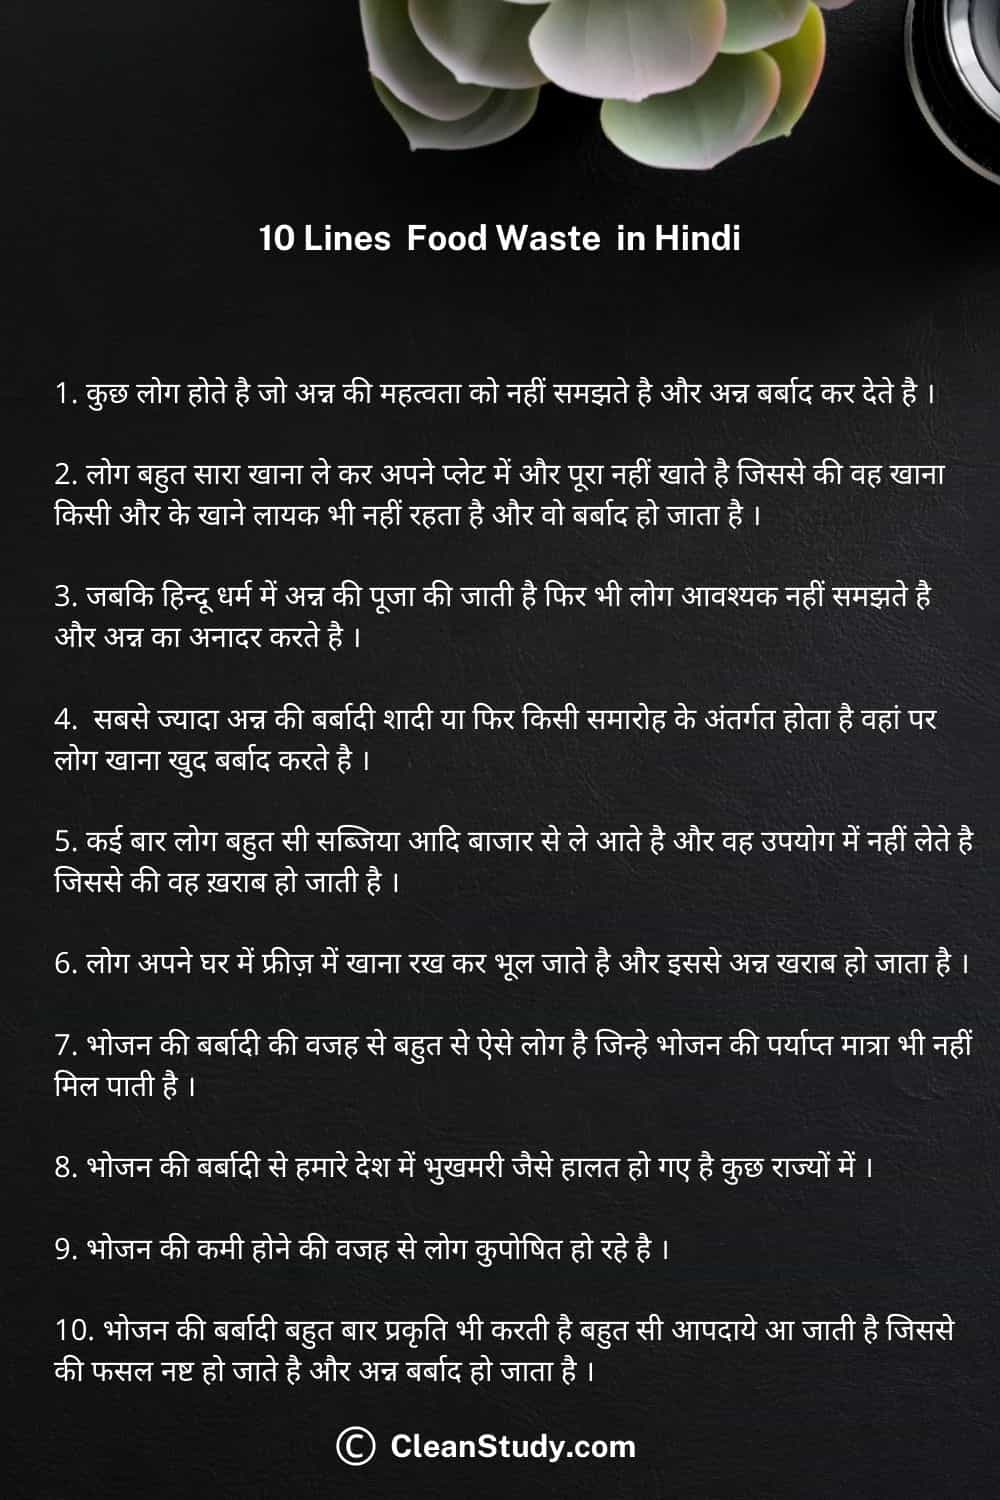 10 lines on foof waste in hindi